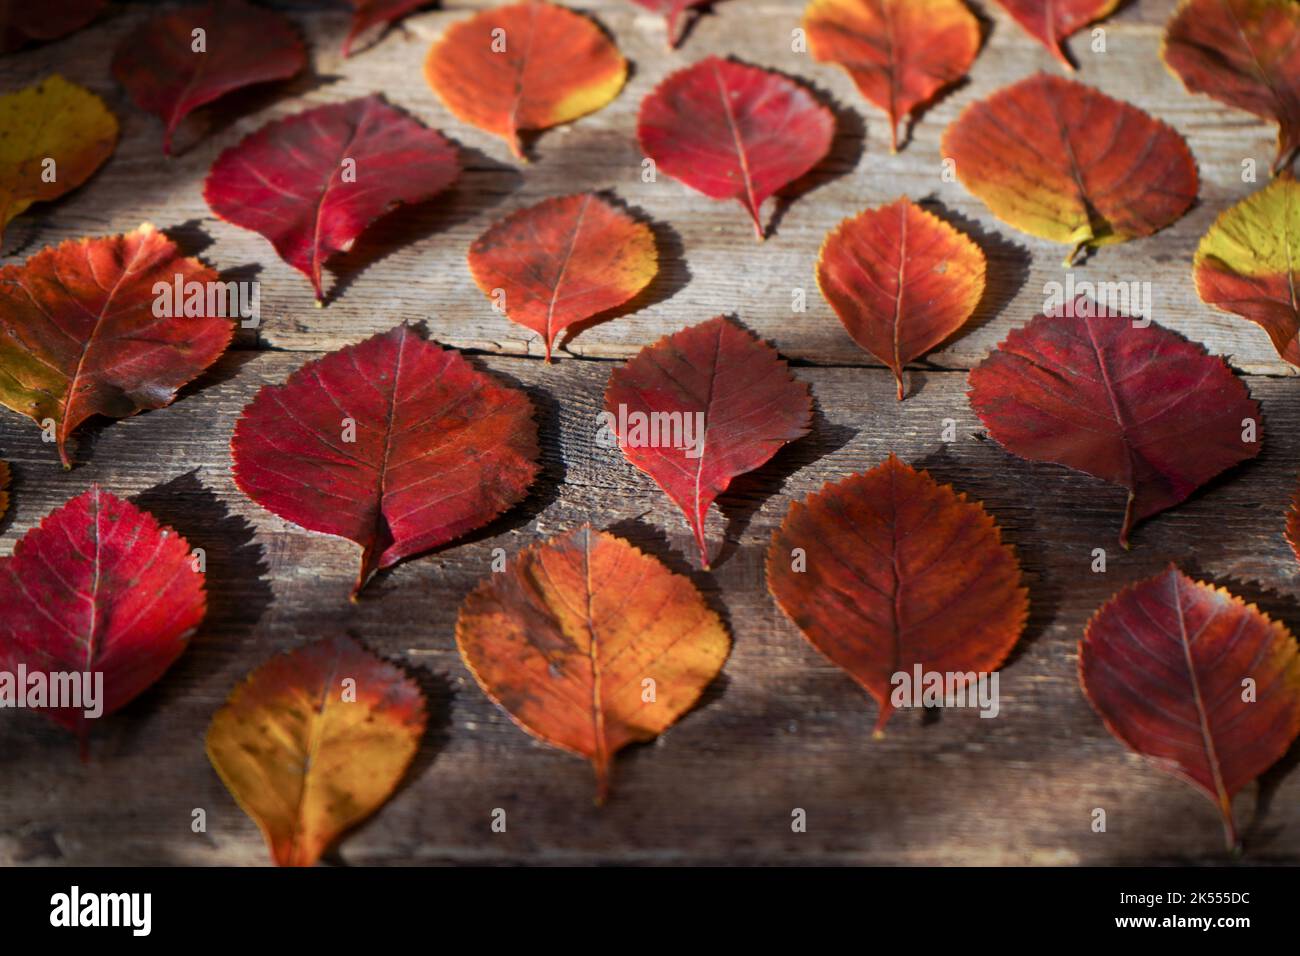 Autumn background. Red, orange leaves from trees on a wooden background. Alder leaf. Stock Photo